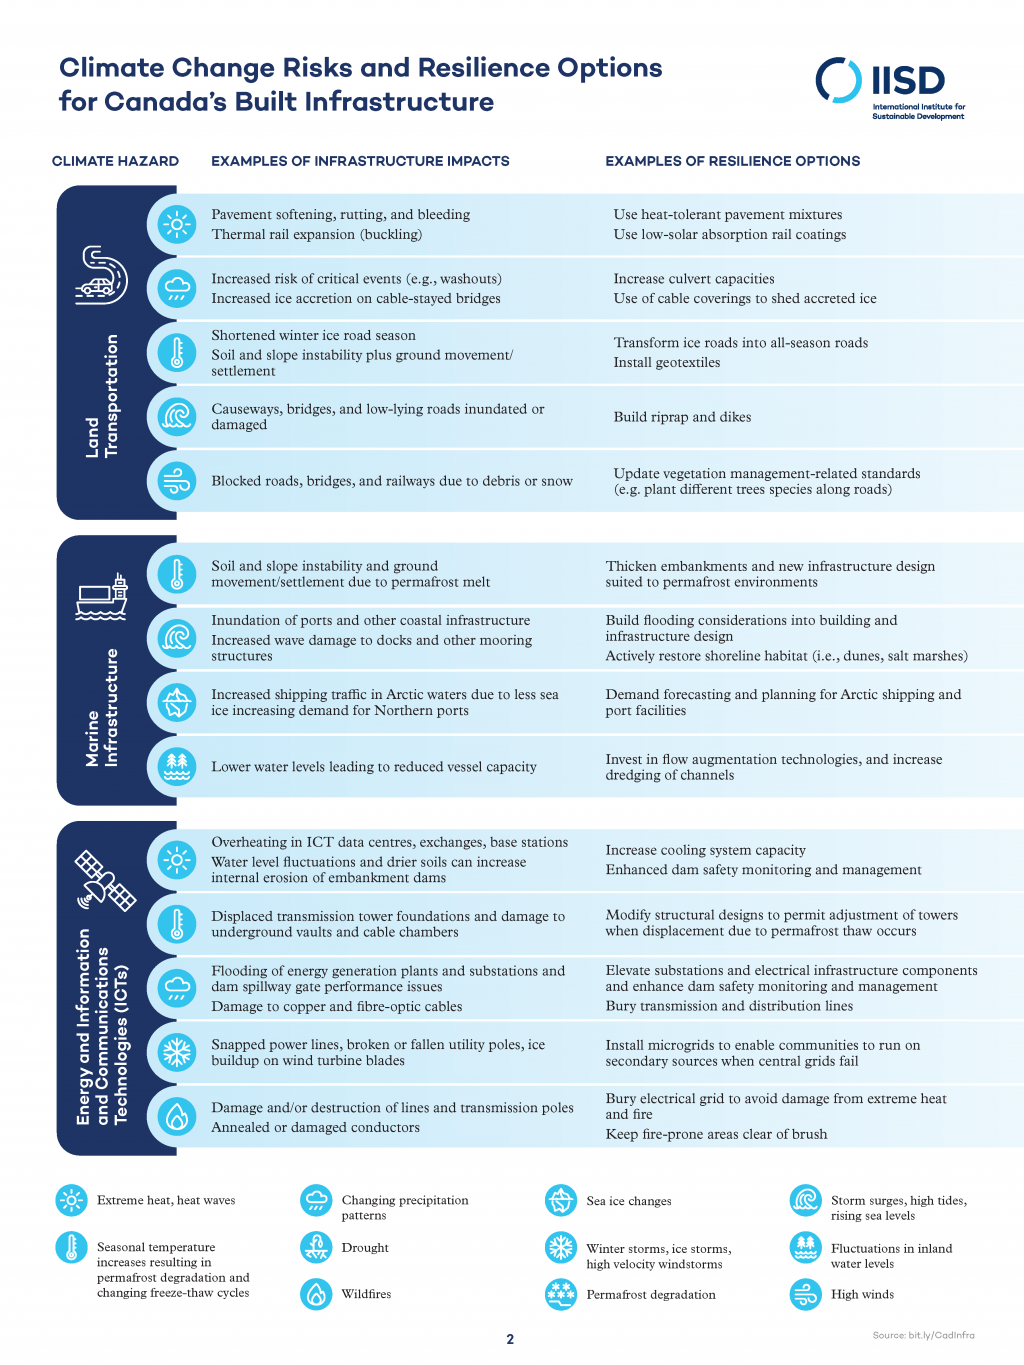 infographic-climate-change-risks-resilience-options-canada-built-infrastructure_2